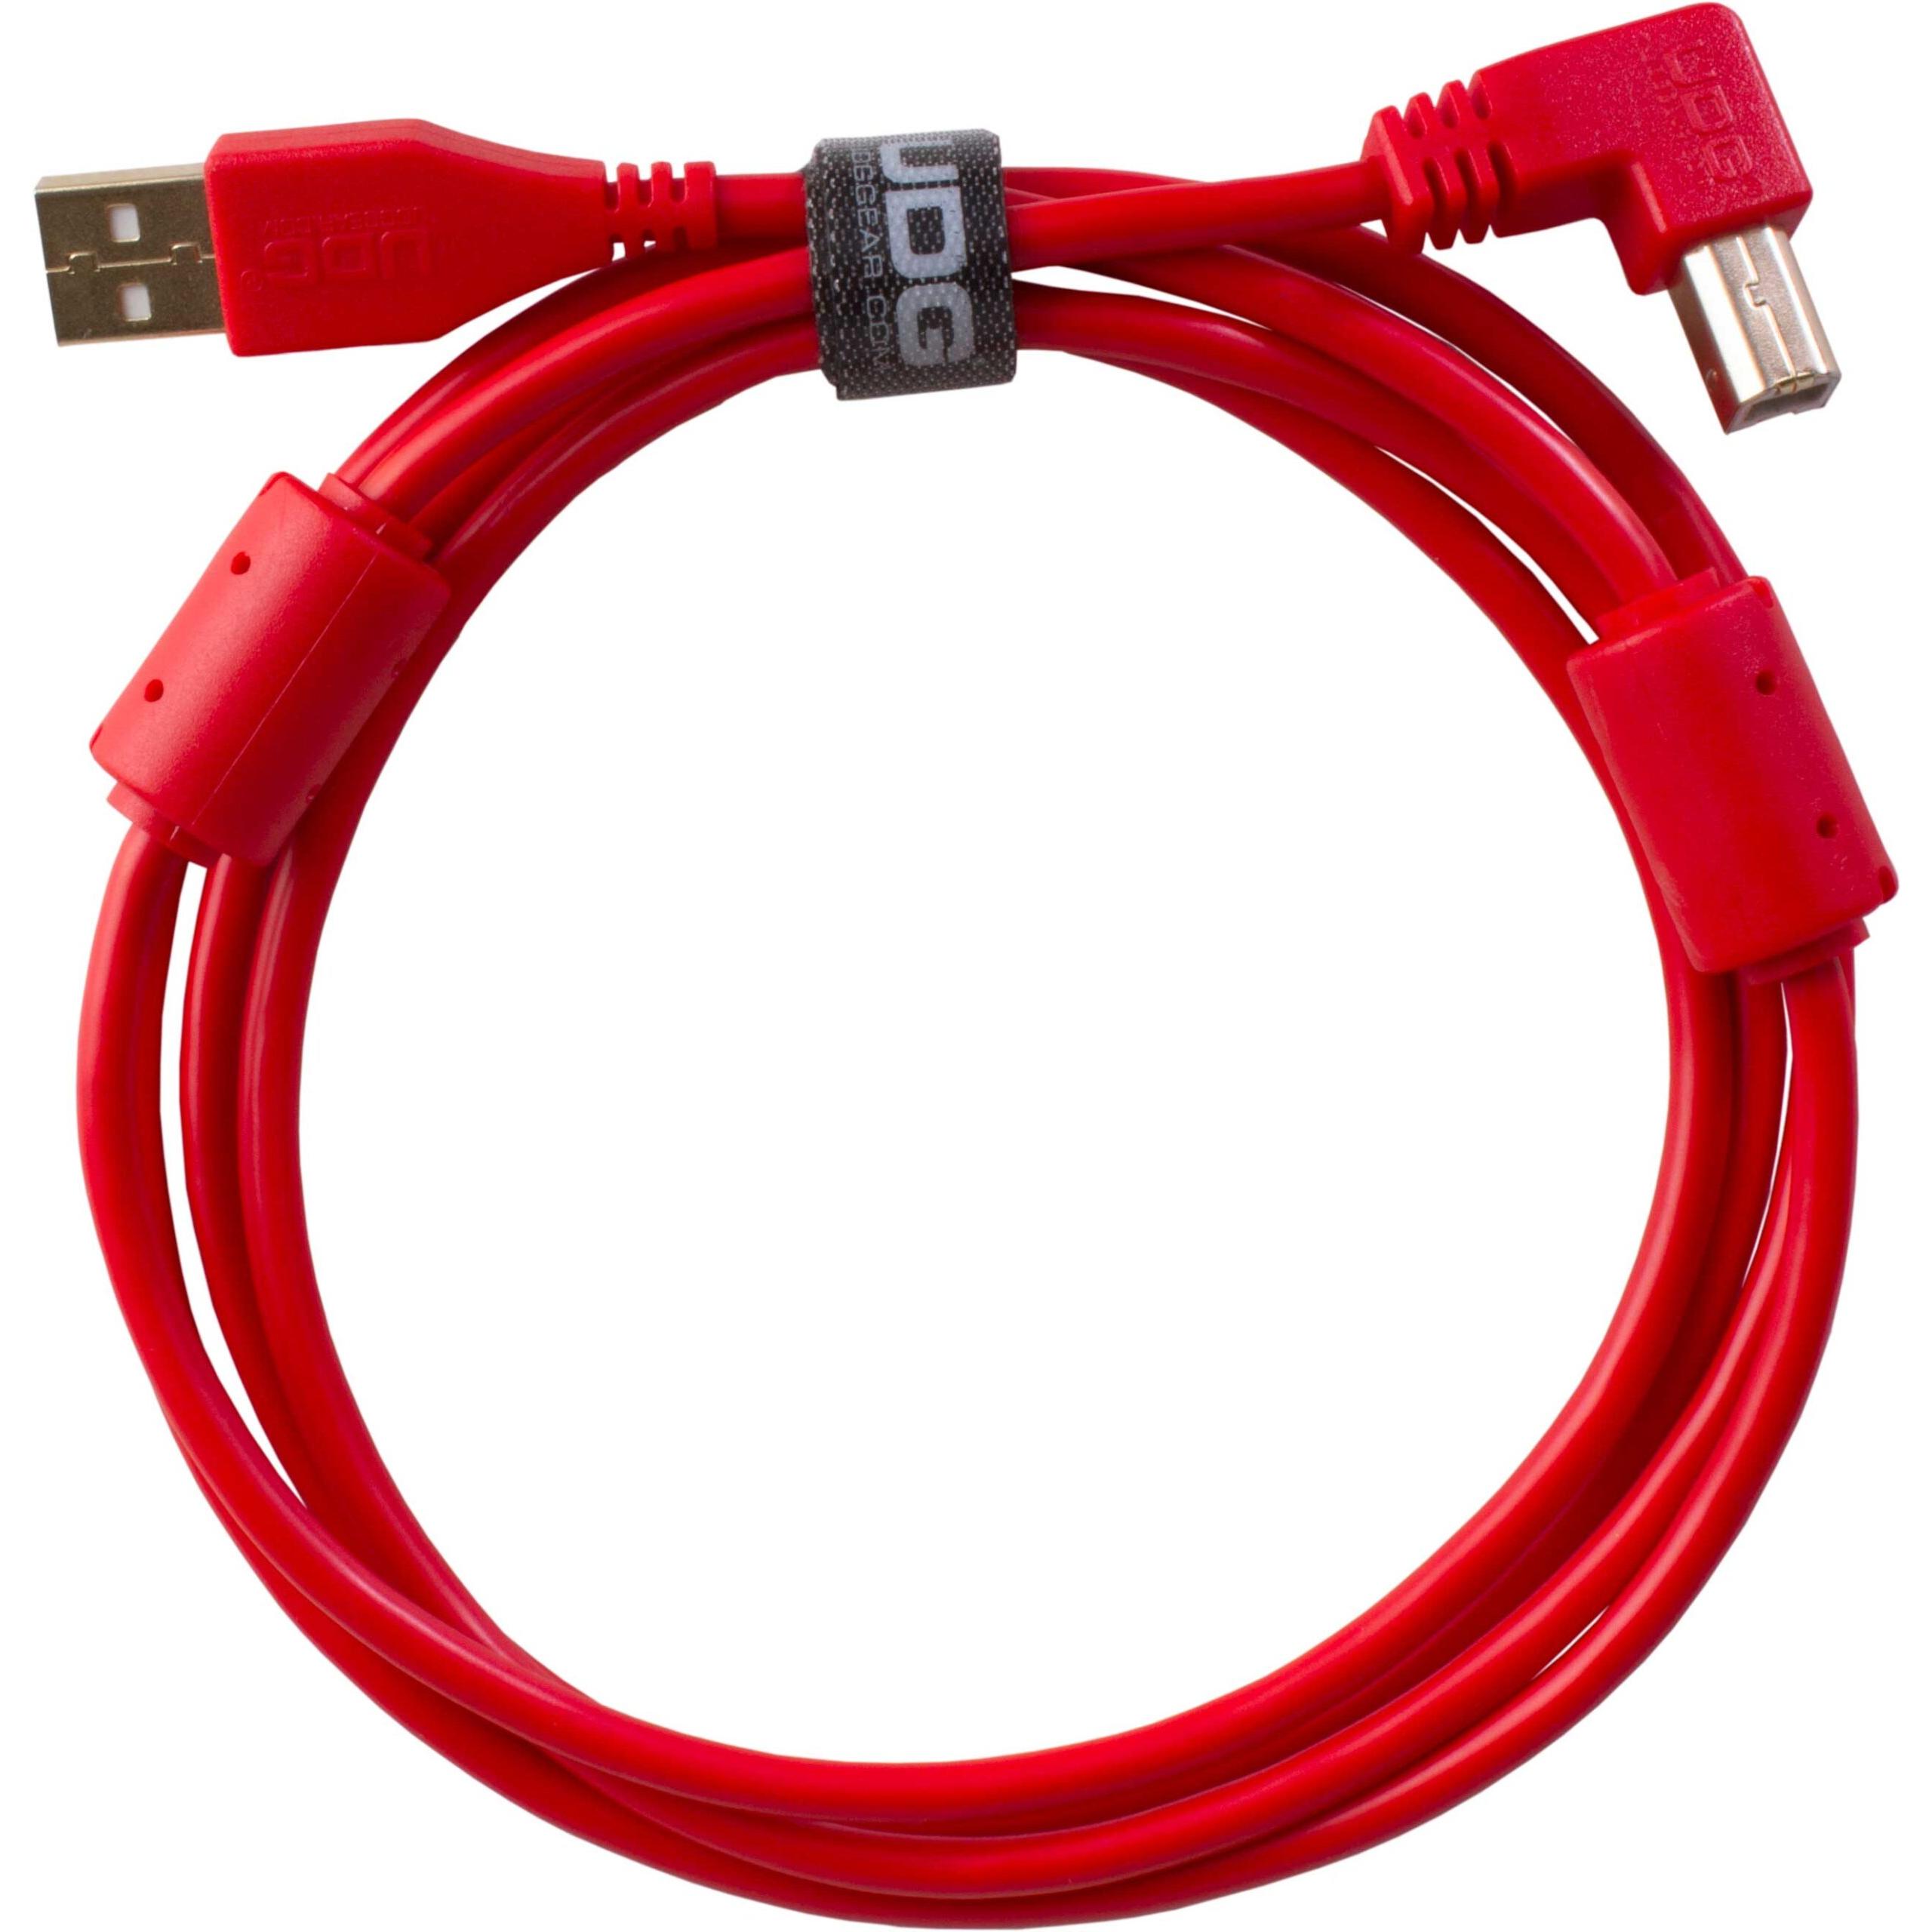 UDG U95004RD - ULTIMATE AUDIO CABLE USB 2.0 A-B RED ANGLED 1M